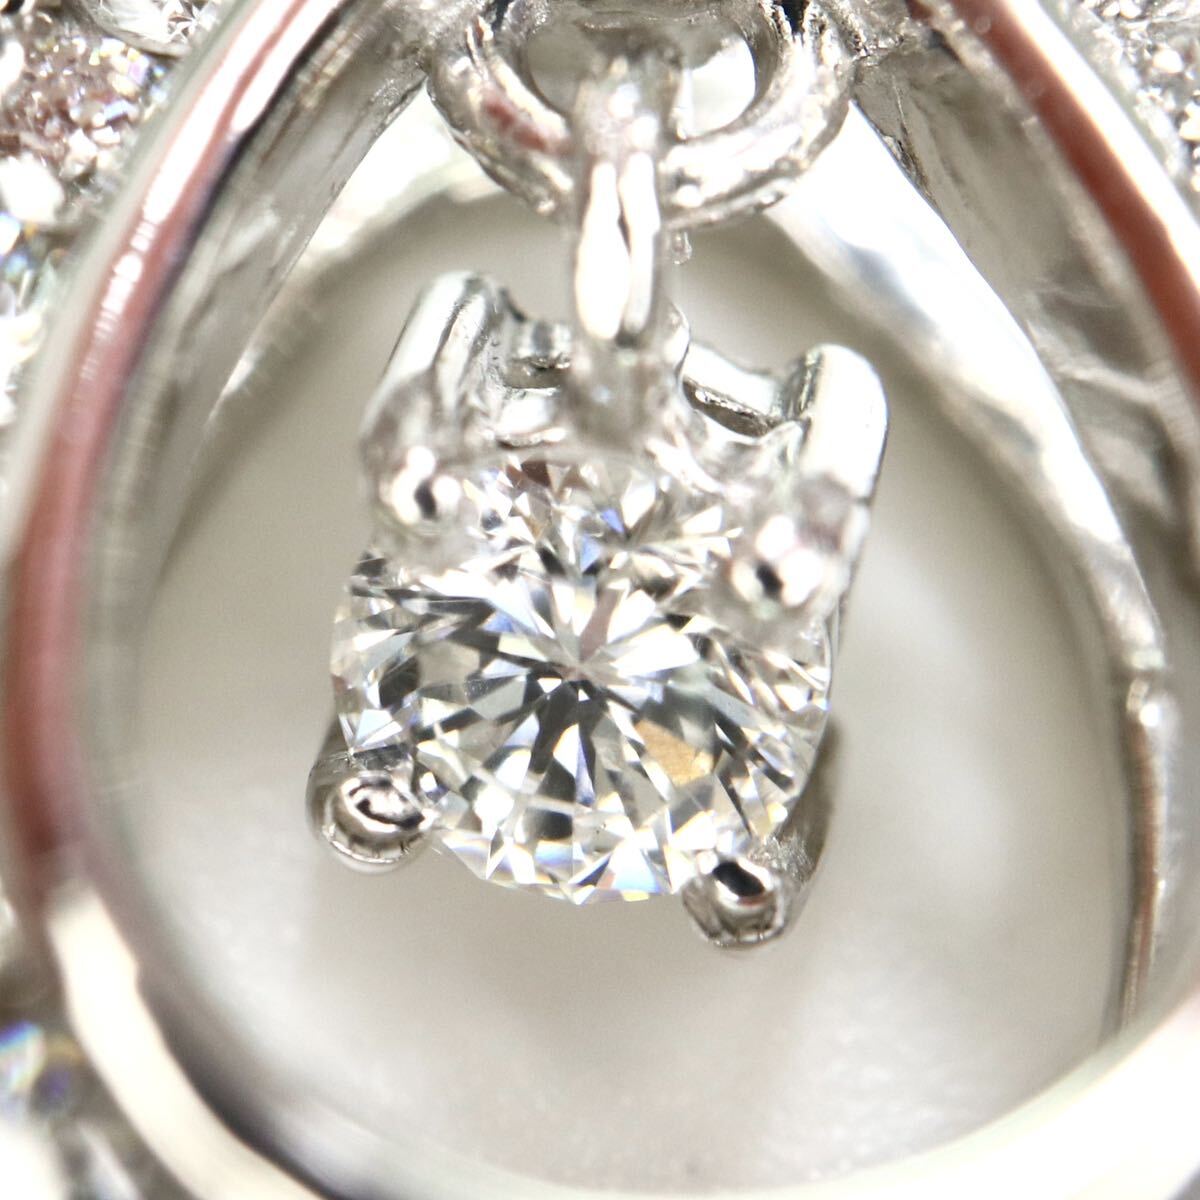 {Pt900 natural diamond pendant top }A approximately 3.2g 0.50ct diamond pendant jewelry jewelry EB3/EC1